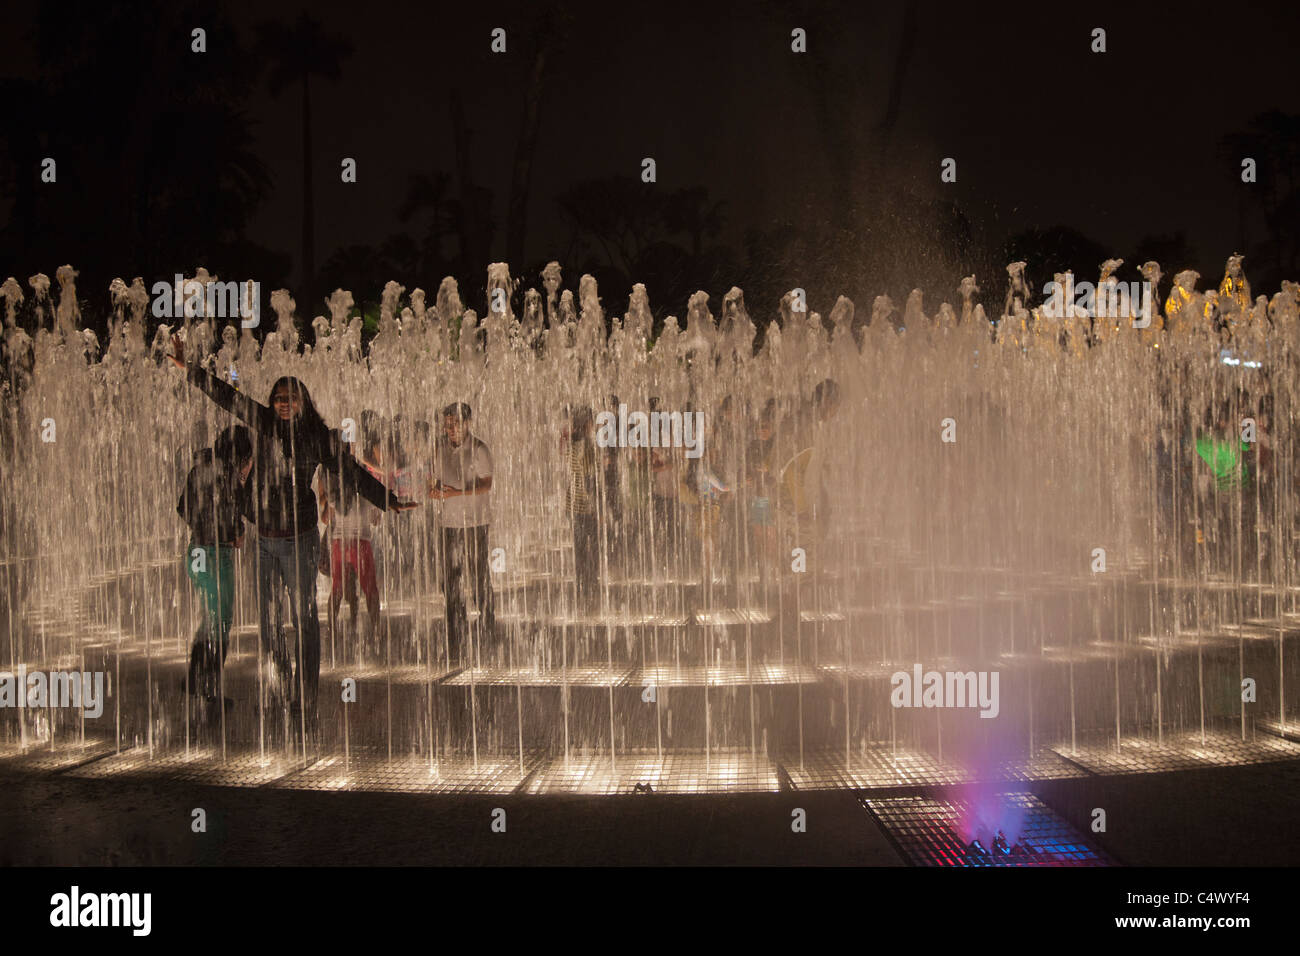 Teenagers posing for photos in the fountains and light show at Parque de la Reserva, Lima, Peru Stock Photo